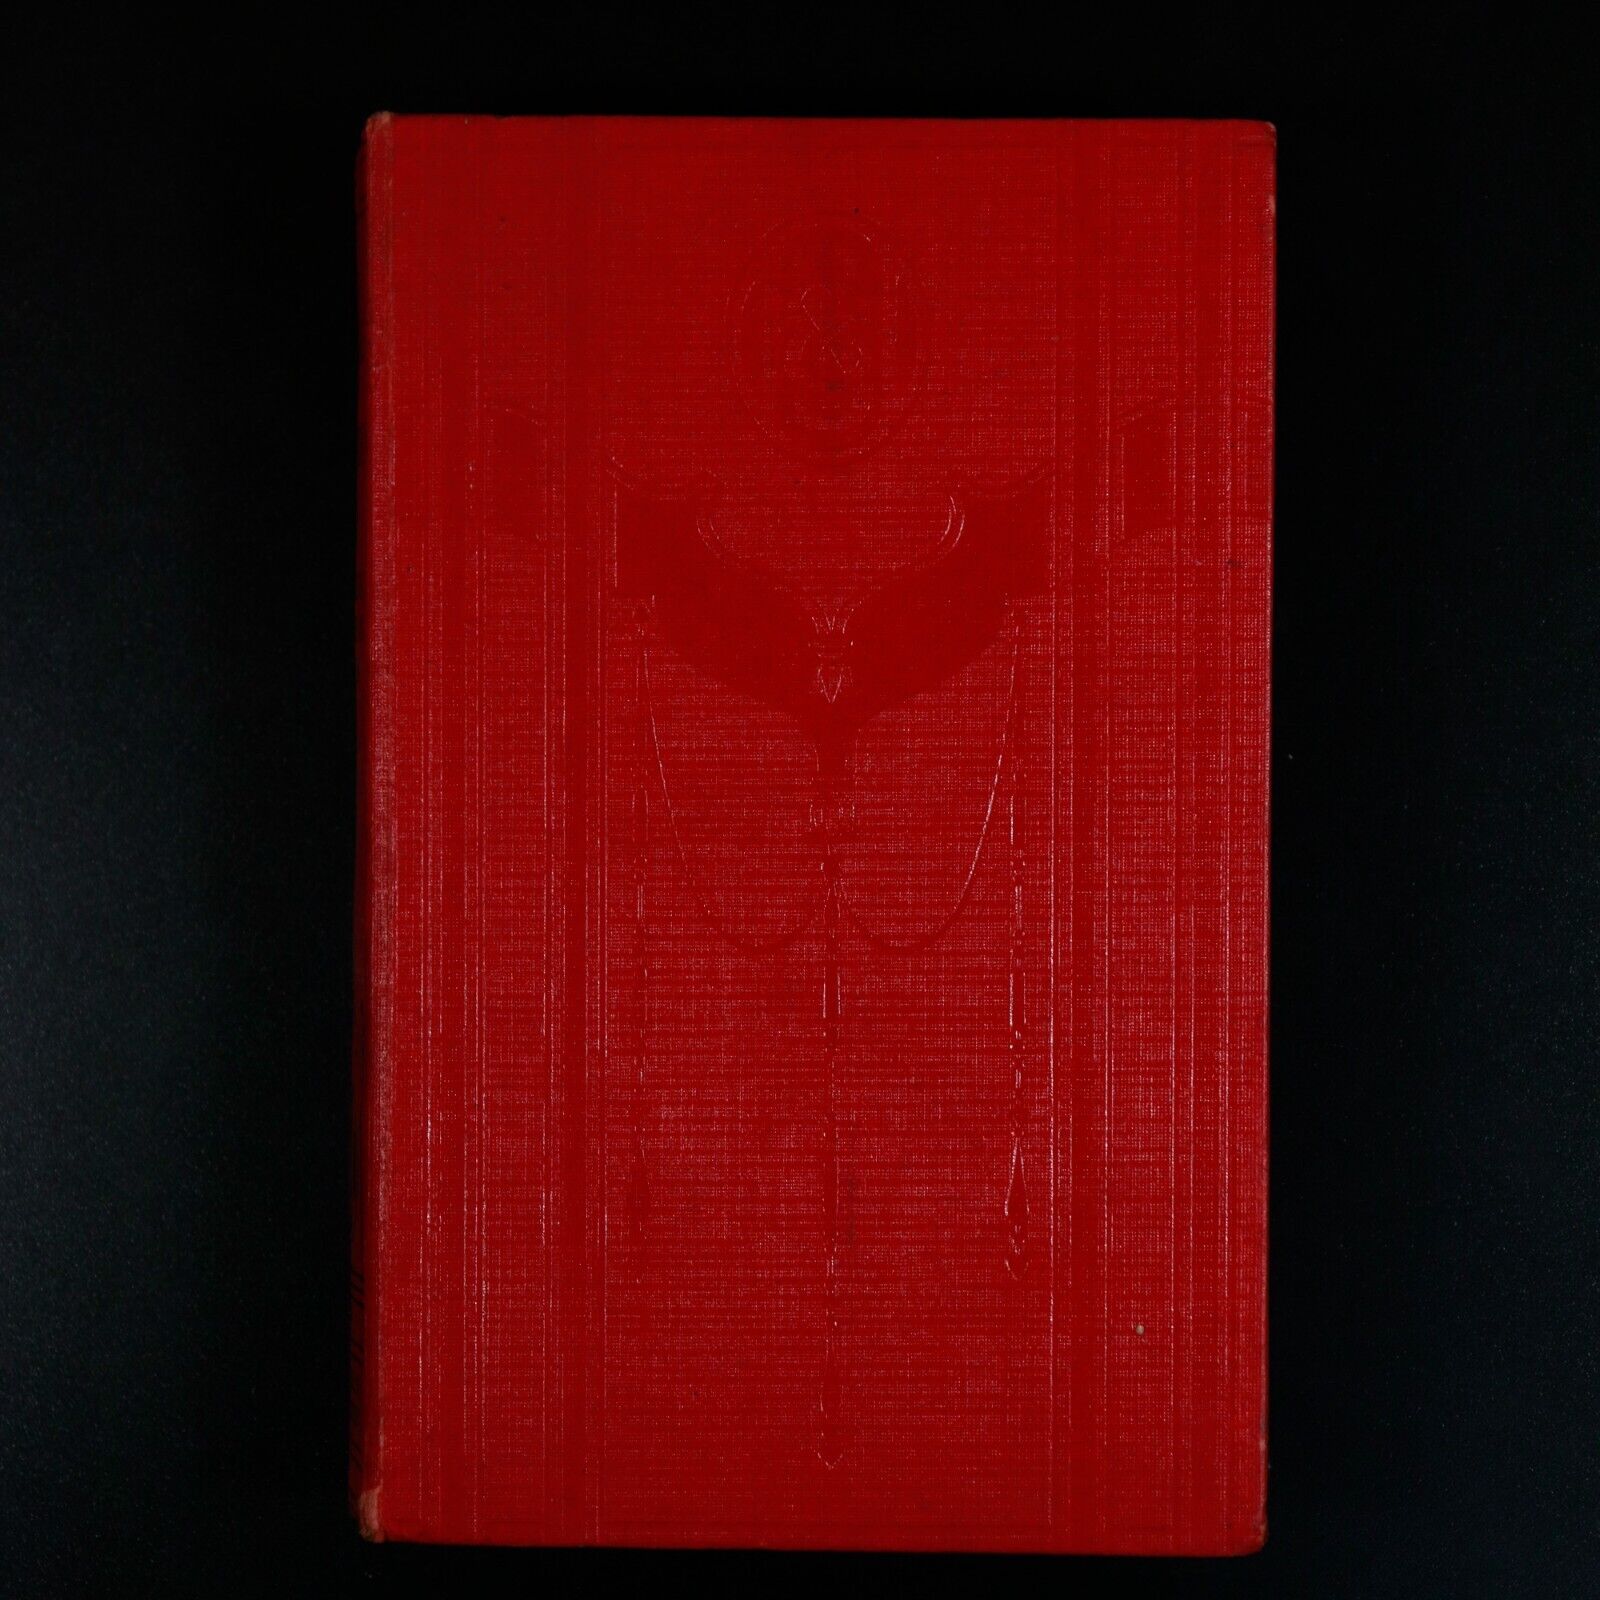 1928 The Flutes Of Shanghai by Louise Jordan Miln Antique American Fiction Book